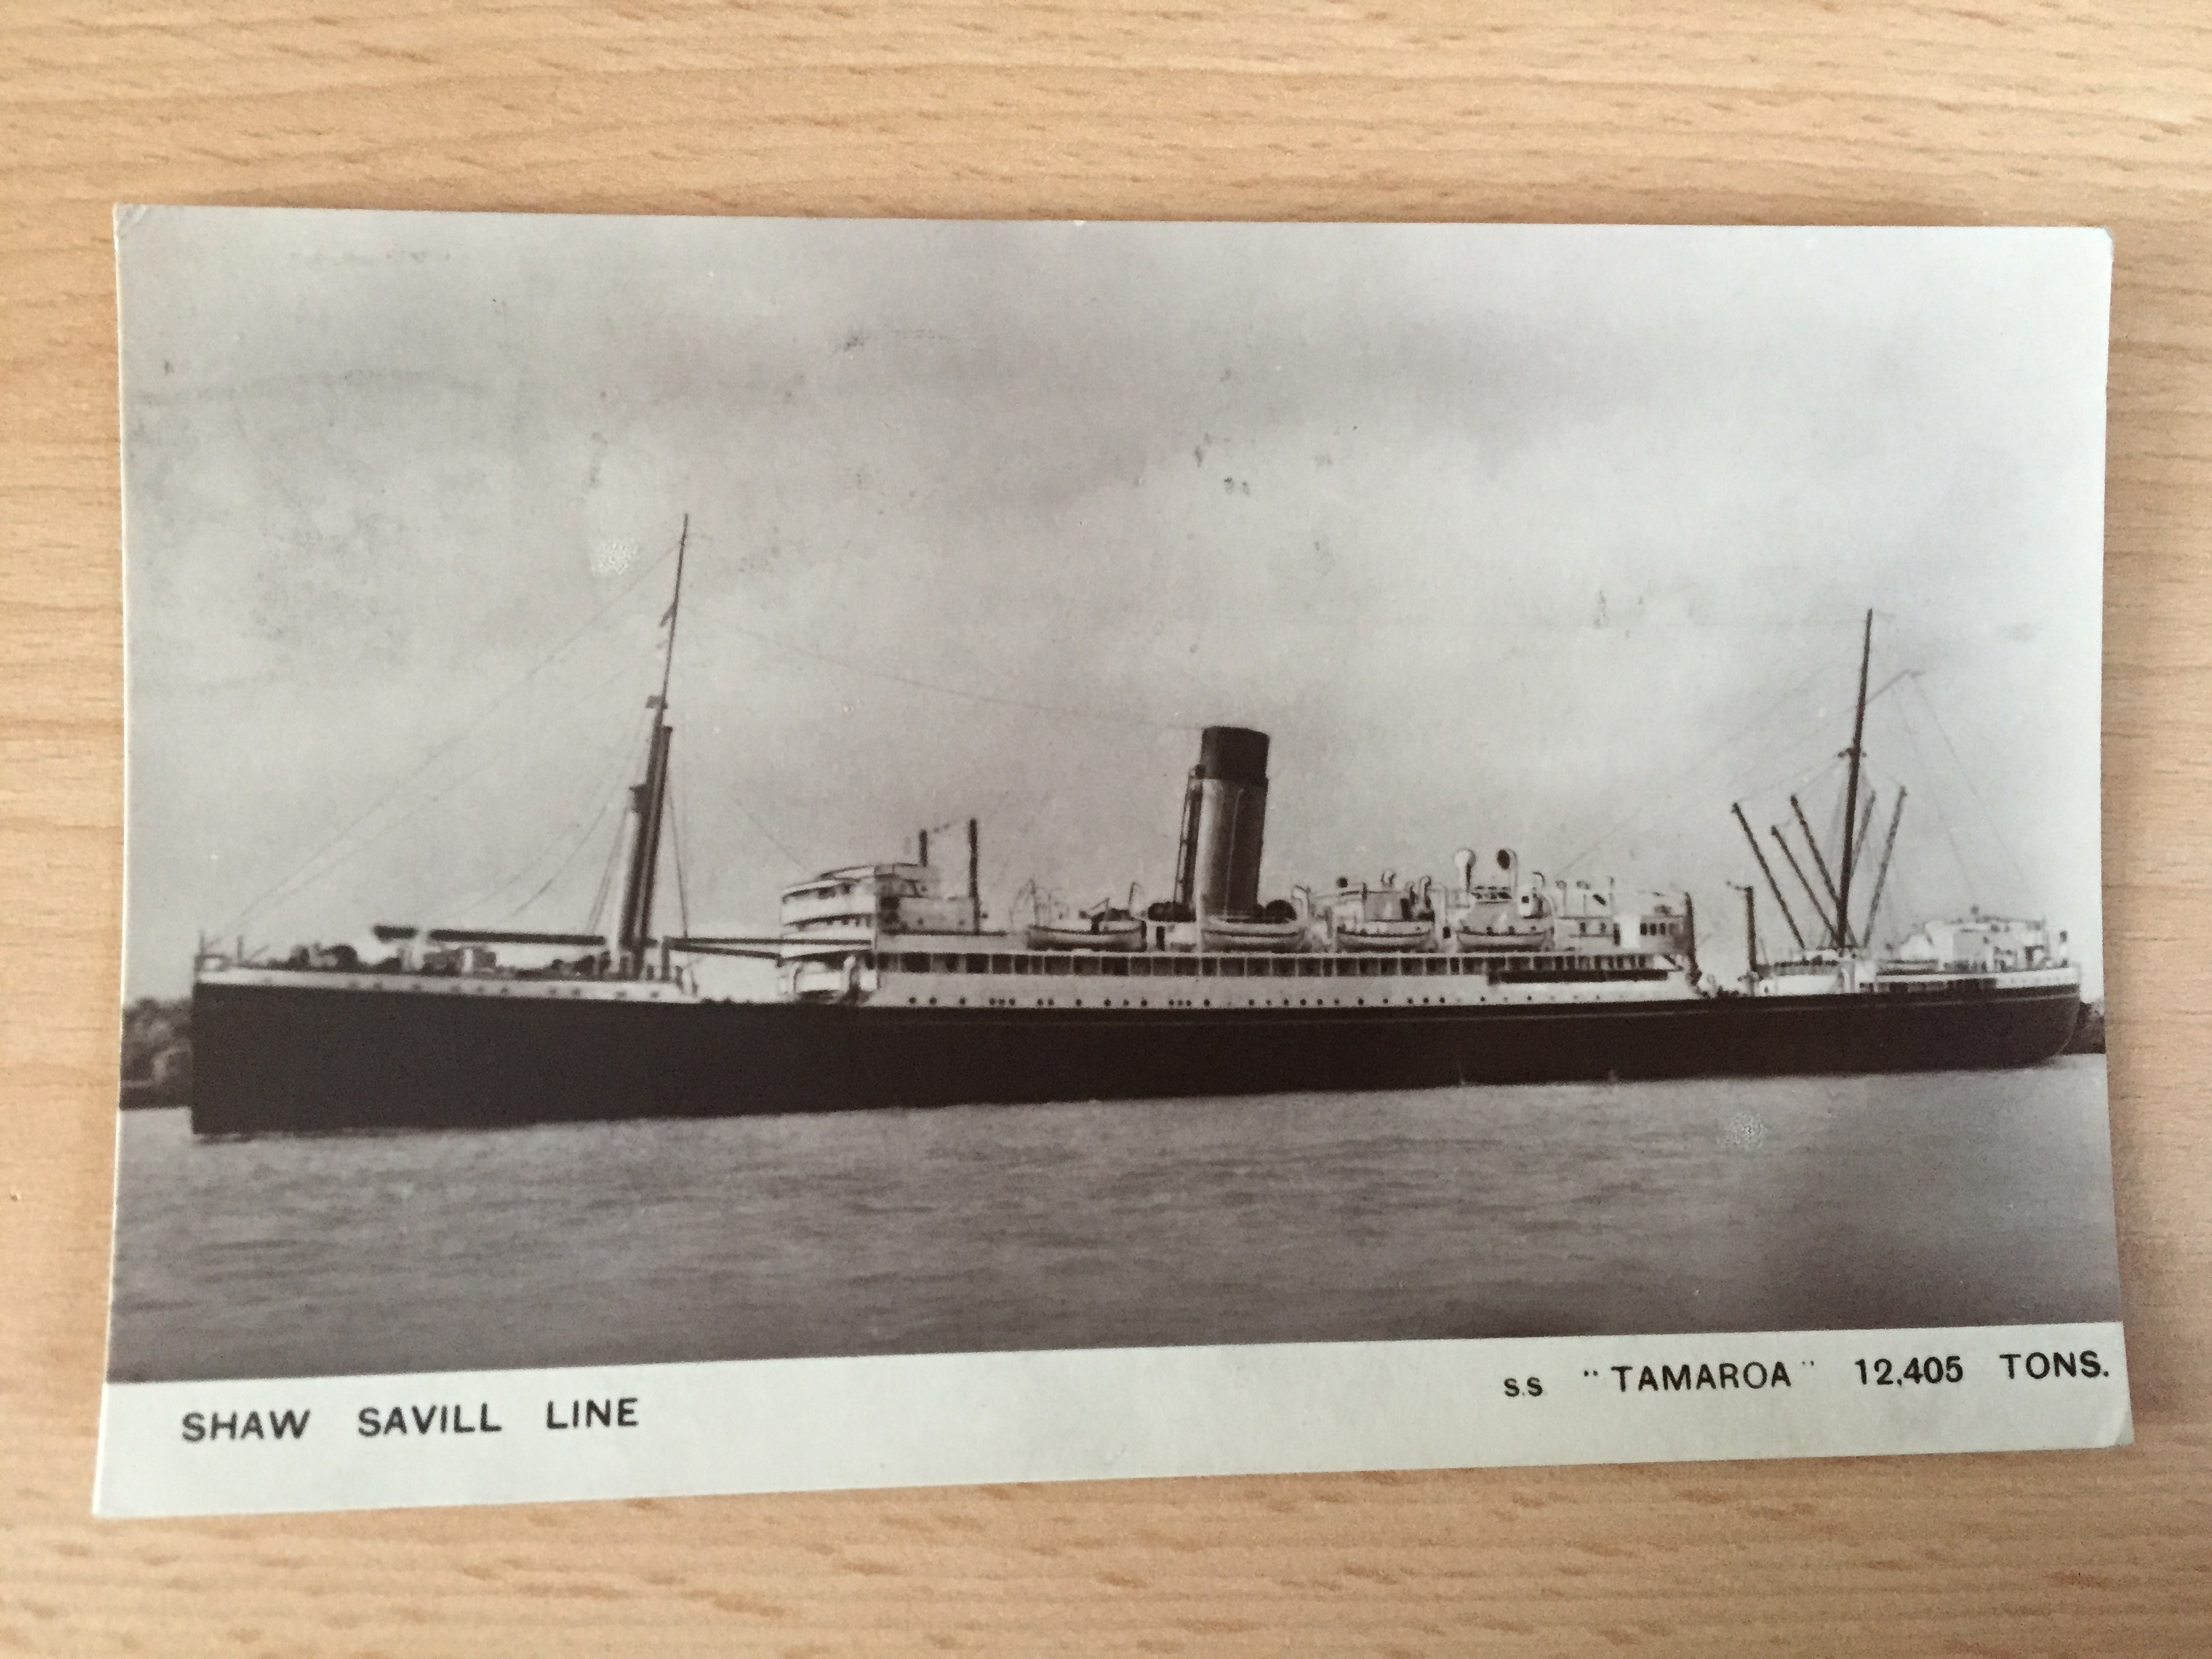 USED B/W POSTCARD FROM THE SS TAMAROA OF THE SHAW SAVILL LINE